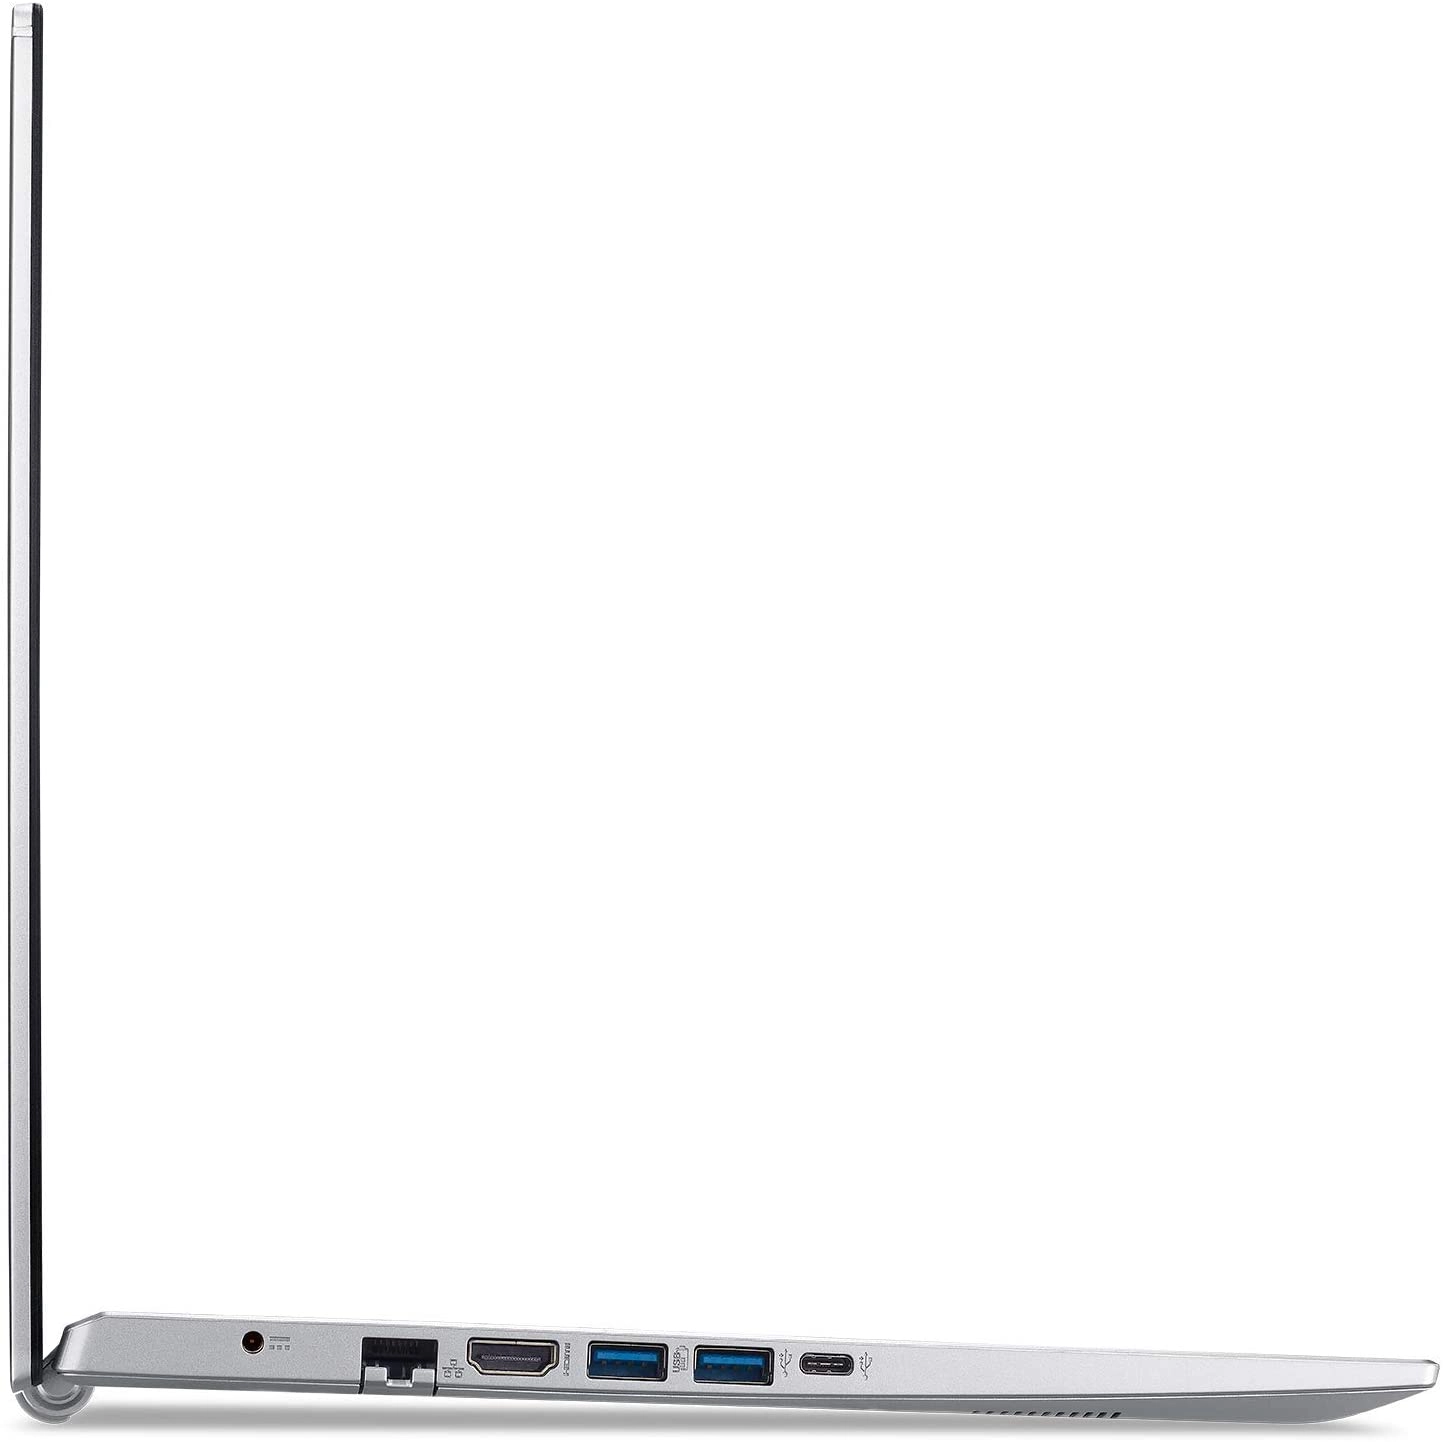 Acer A515-56-50RS laptop image